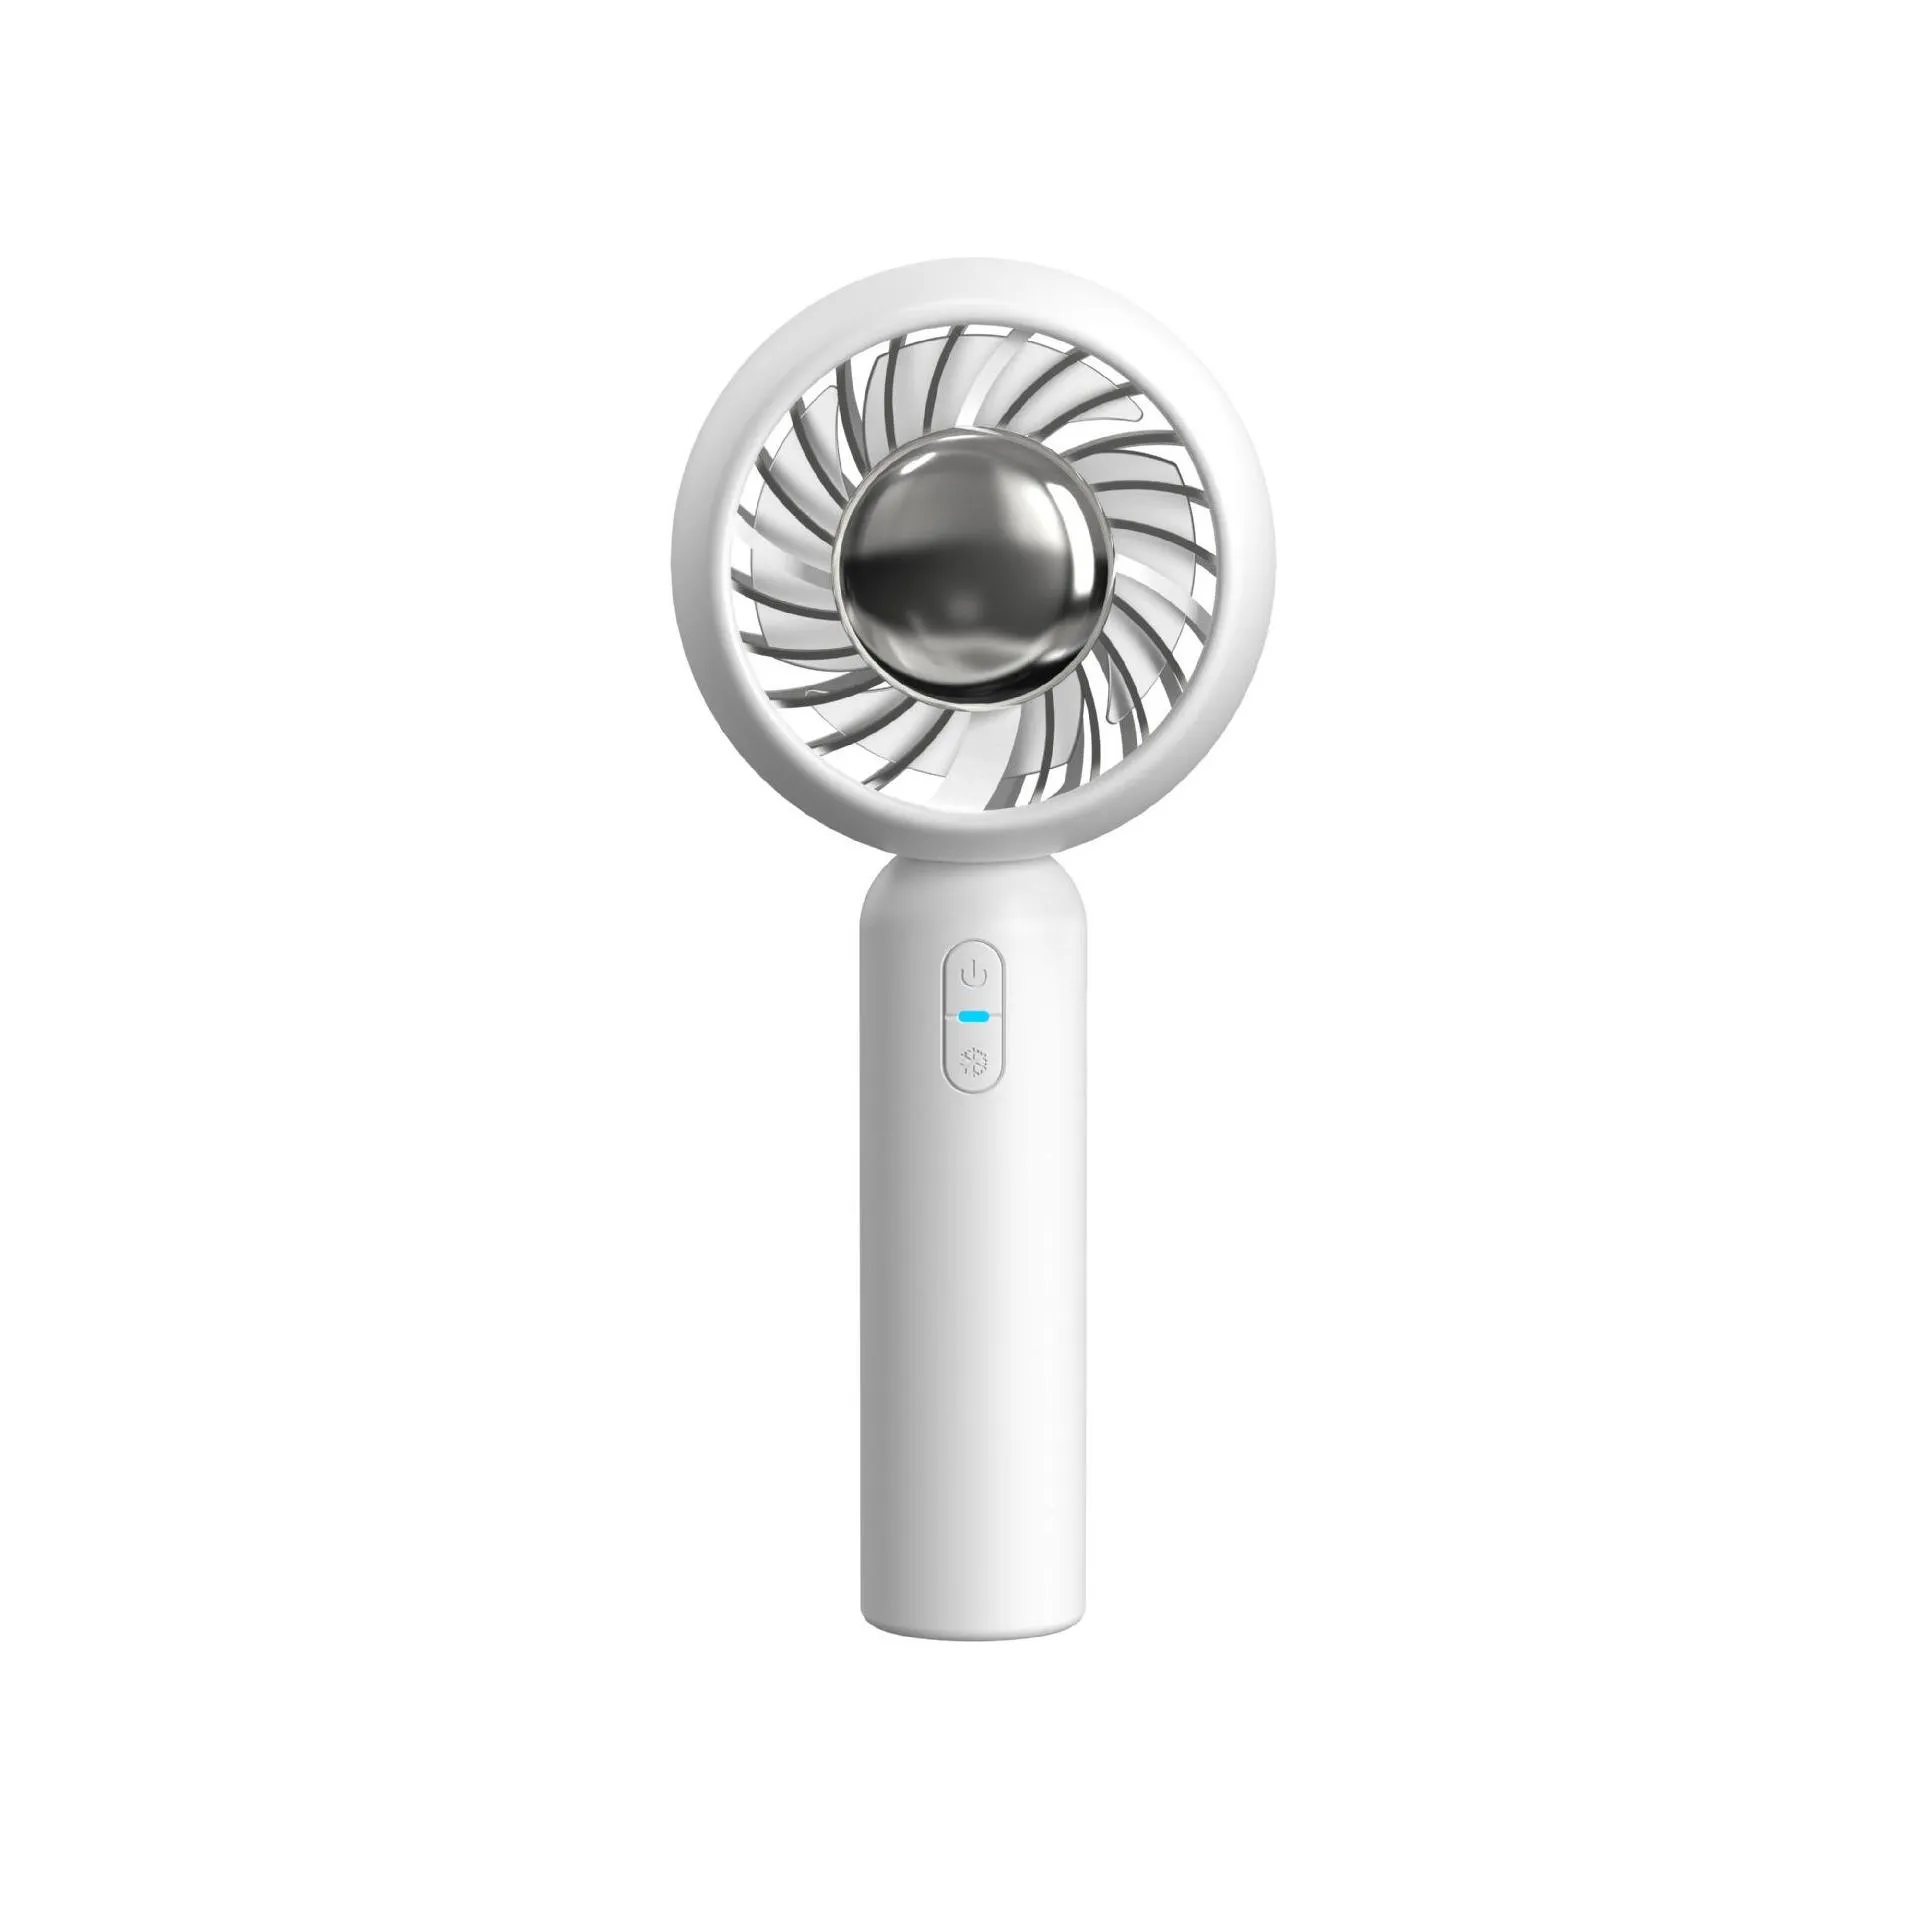 2022 summer products can be customized usb portable handheld small fan creative ice mini electric fan mute high wind handfan